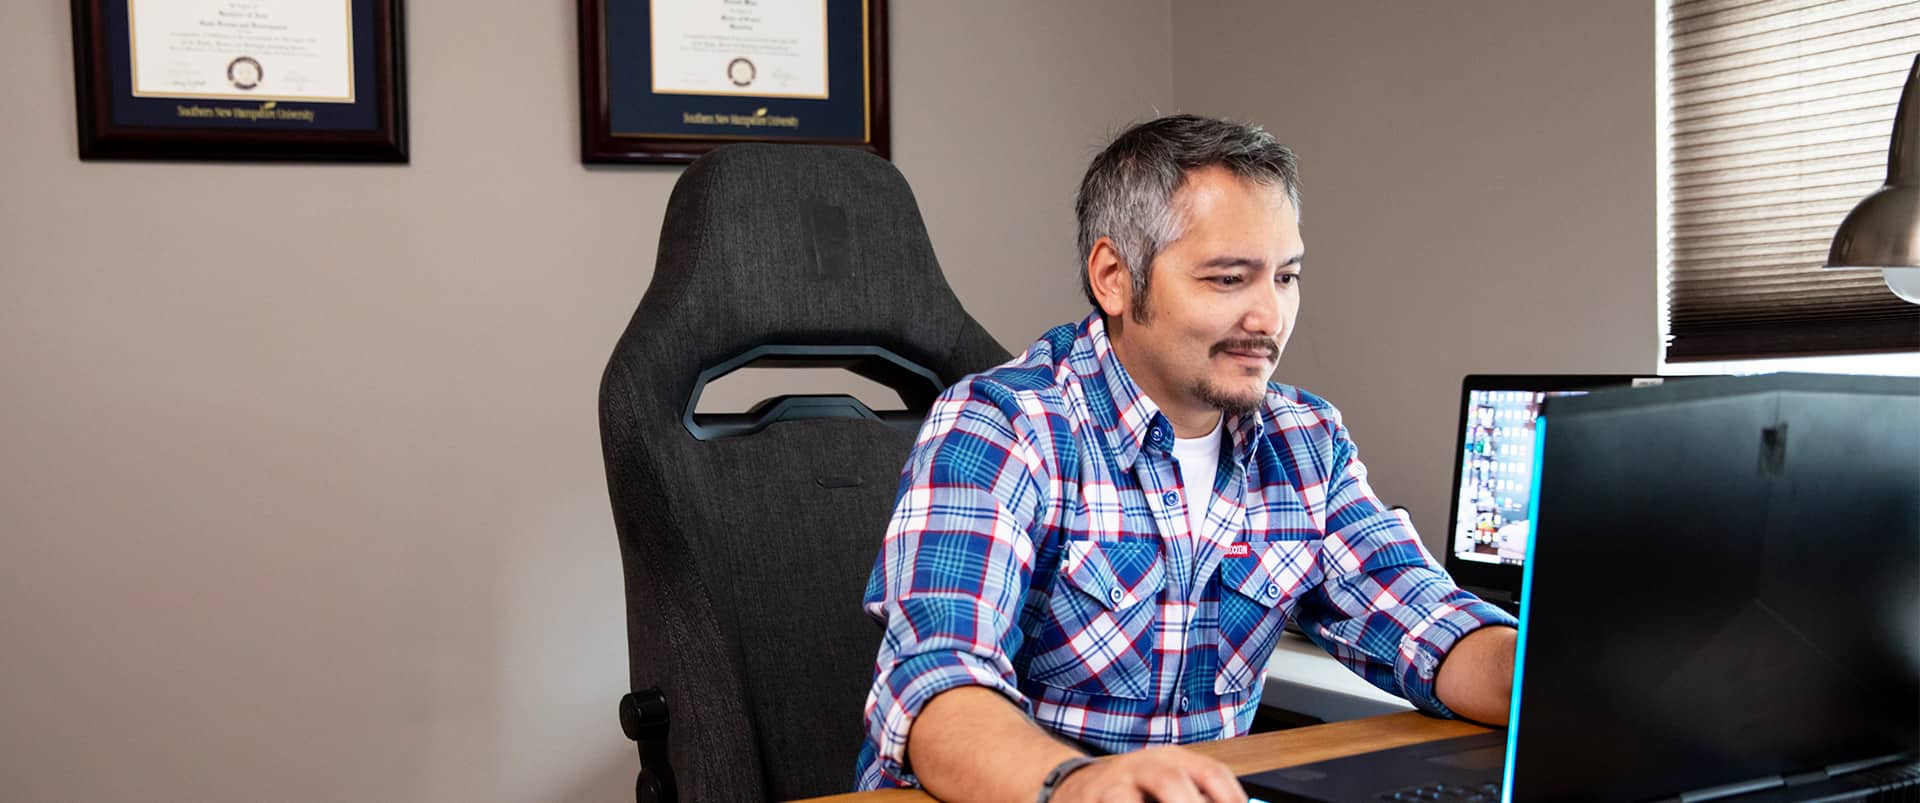 "Derald Wise, who earned degrees from SNHU in 2014 and 2018, sitting at a desk  working on a laptop with two framed SNHU degrees on the wall behind him."